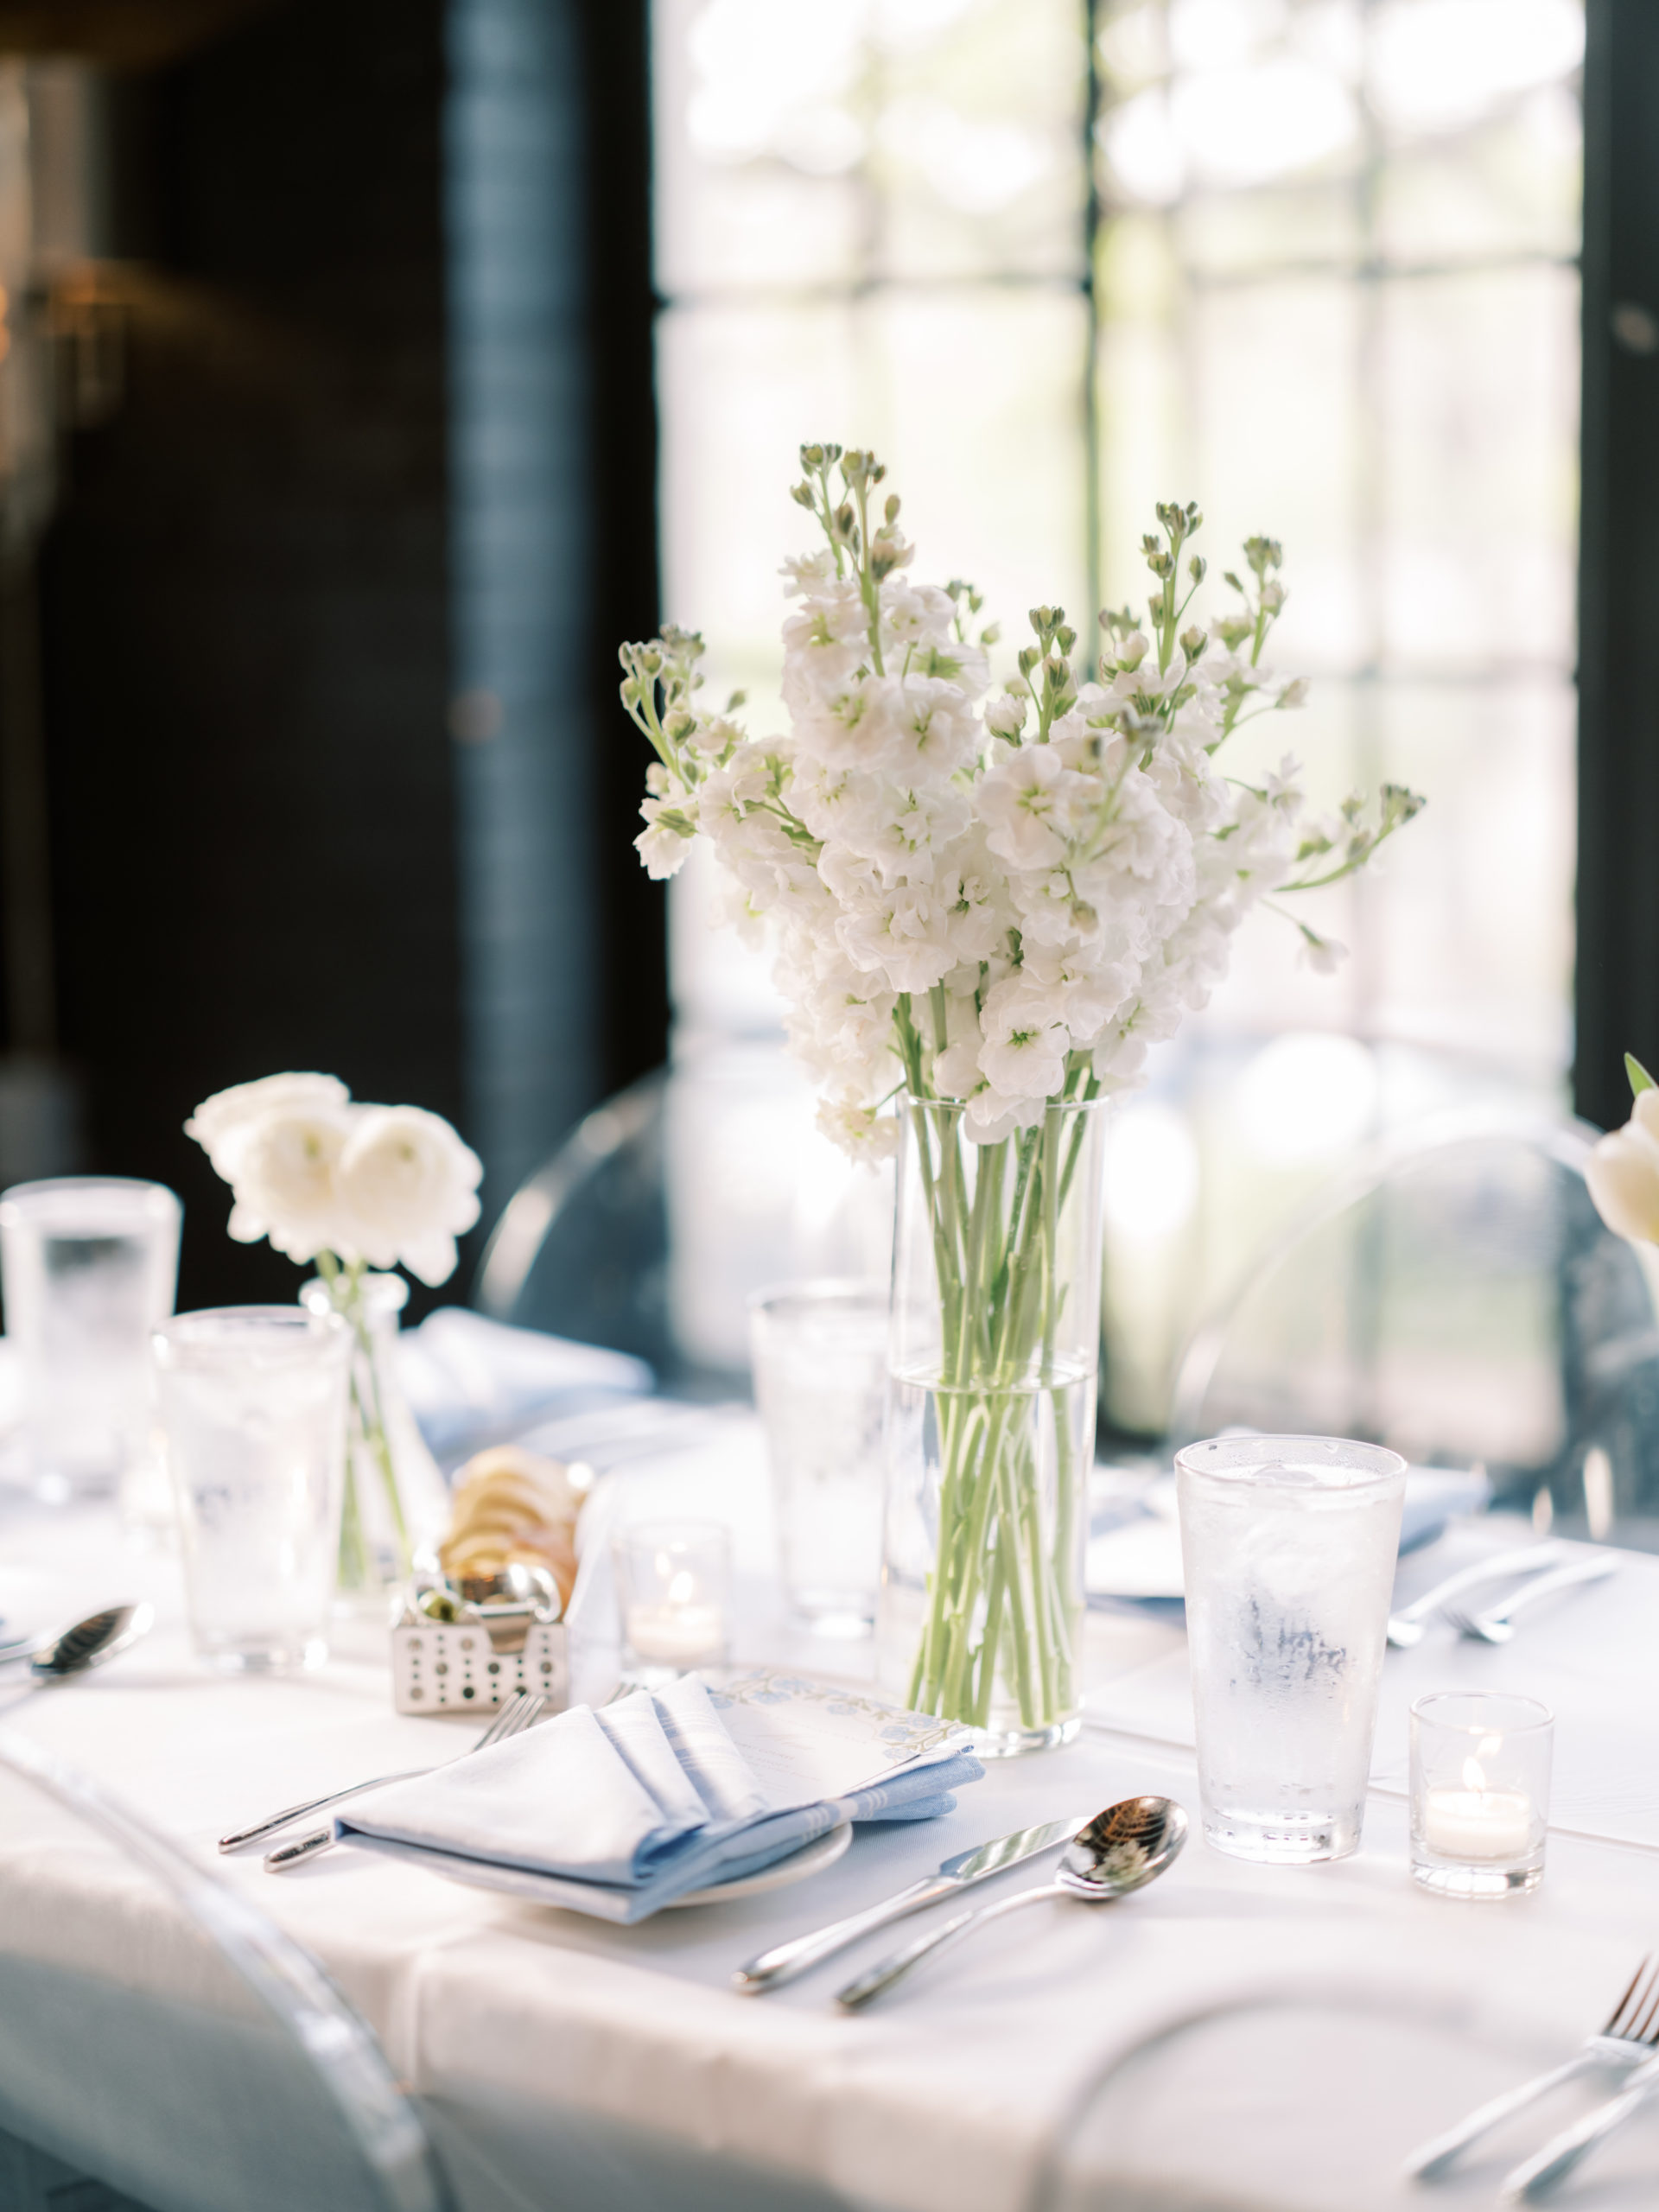 Rehearsal dinner table setting with white florals from Something Pretty Floral at Lounge 31 in Highland Park Village